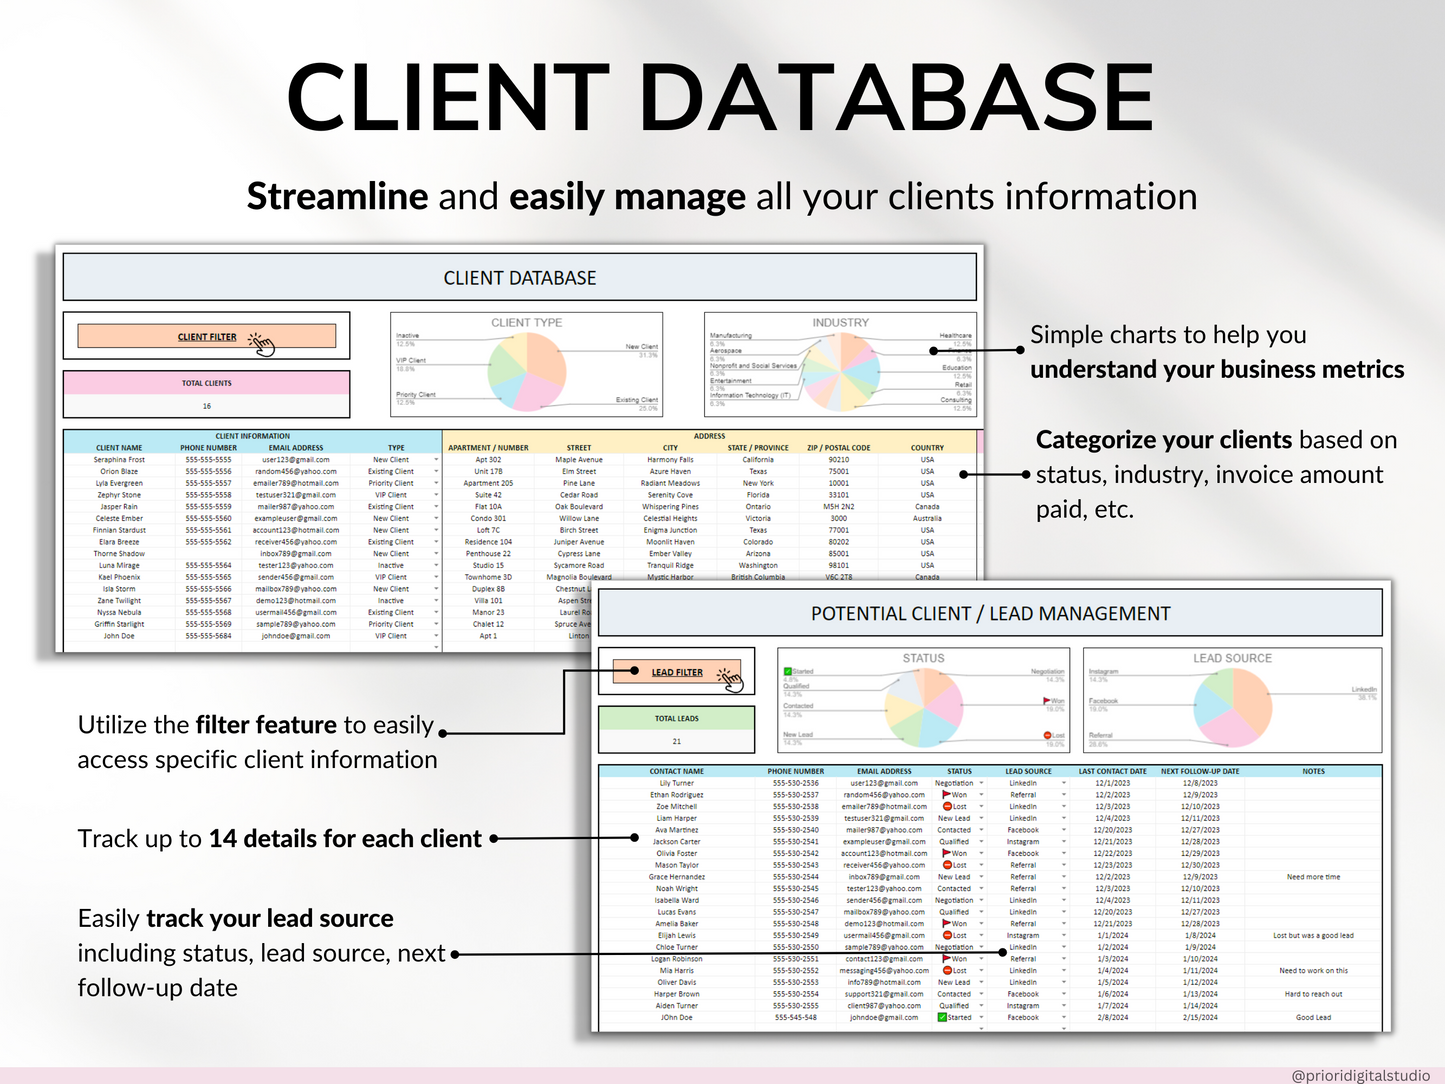 Client Tracker Spreadsheet for Small Business with Task Tracker Customer CRM Dashboard Google Sheets Excel Lead Management Invoice Tracker